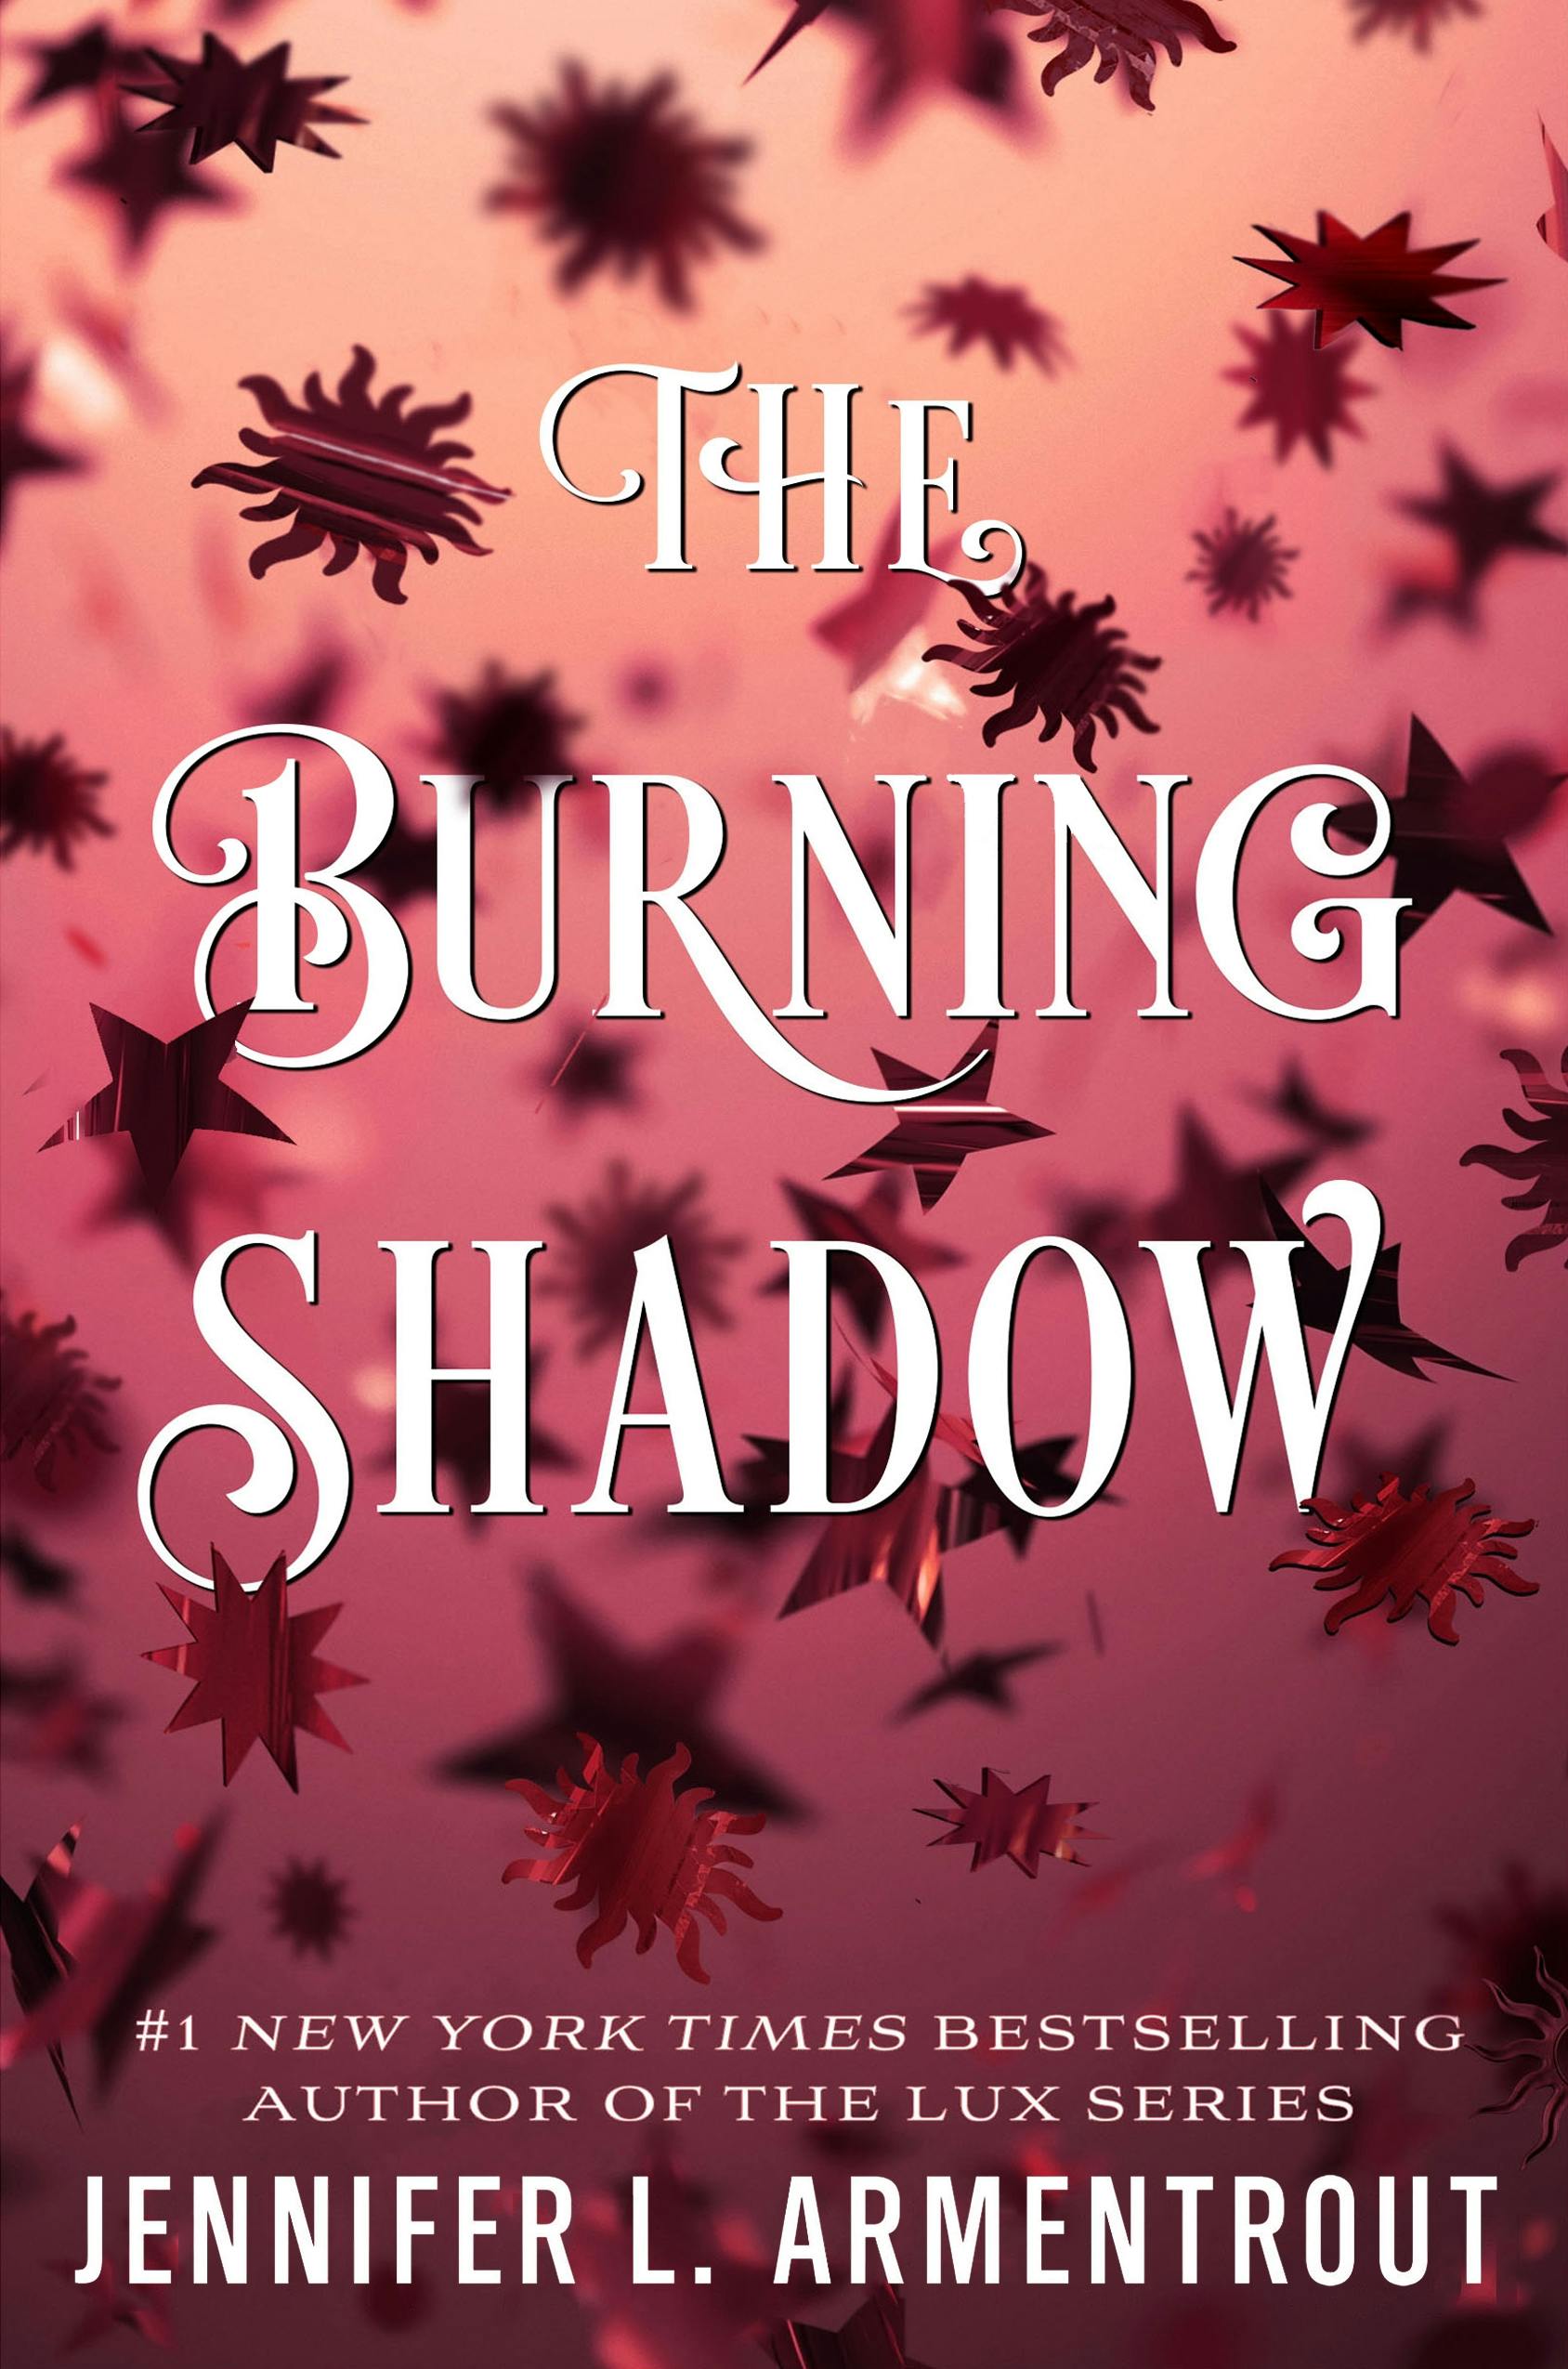 Cover for the book titled as: The Burning Shadow